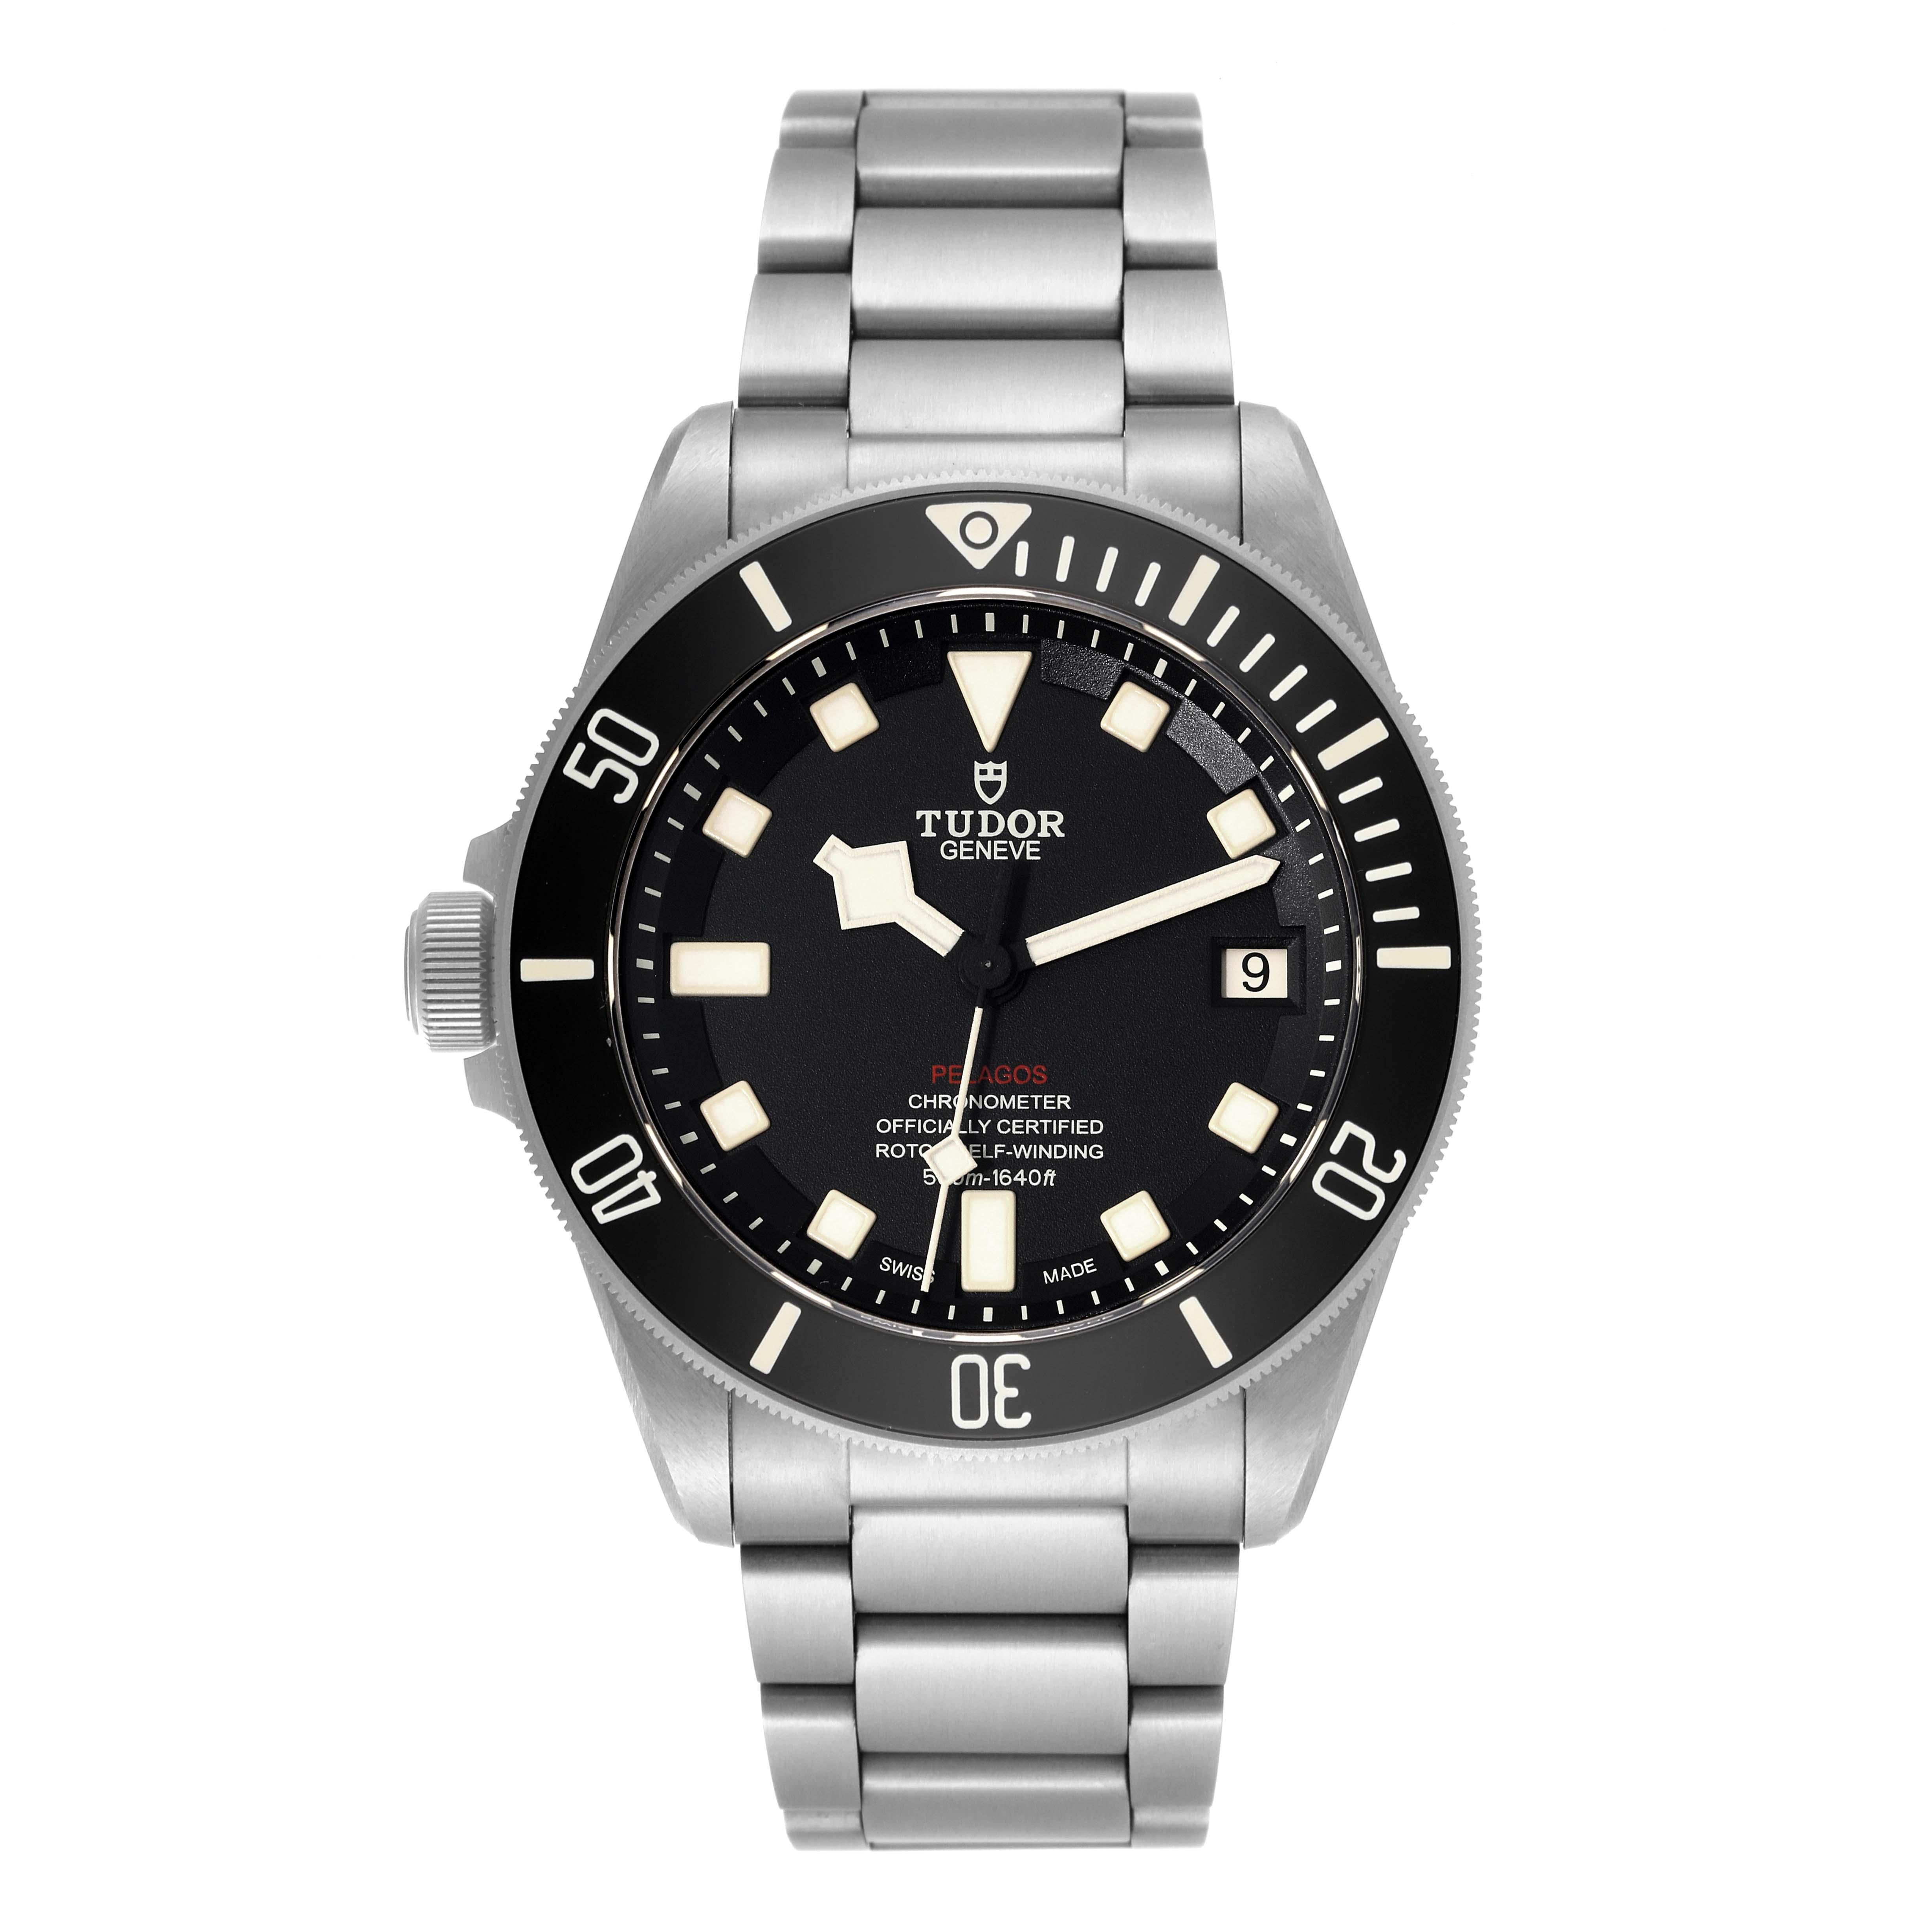 Tudor Pelagos 42mm LHD Titanium Steel Mens Watch 25610 Box Card. Automatic self-winding movement. Titanium and steel case 42 mm in diameter. Tudor logo on a crown. Pointed crown guards. Unidirectional rotating 60 minute graduated bezel with black